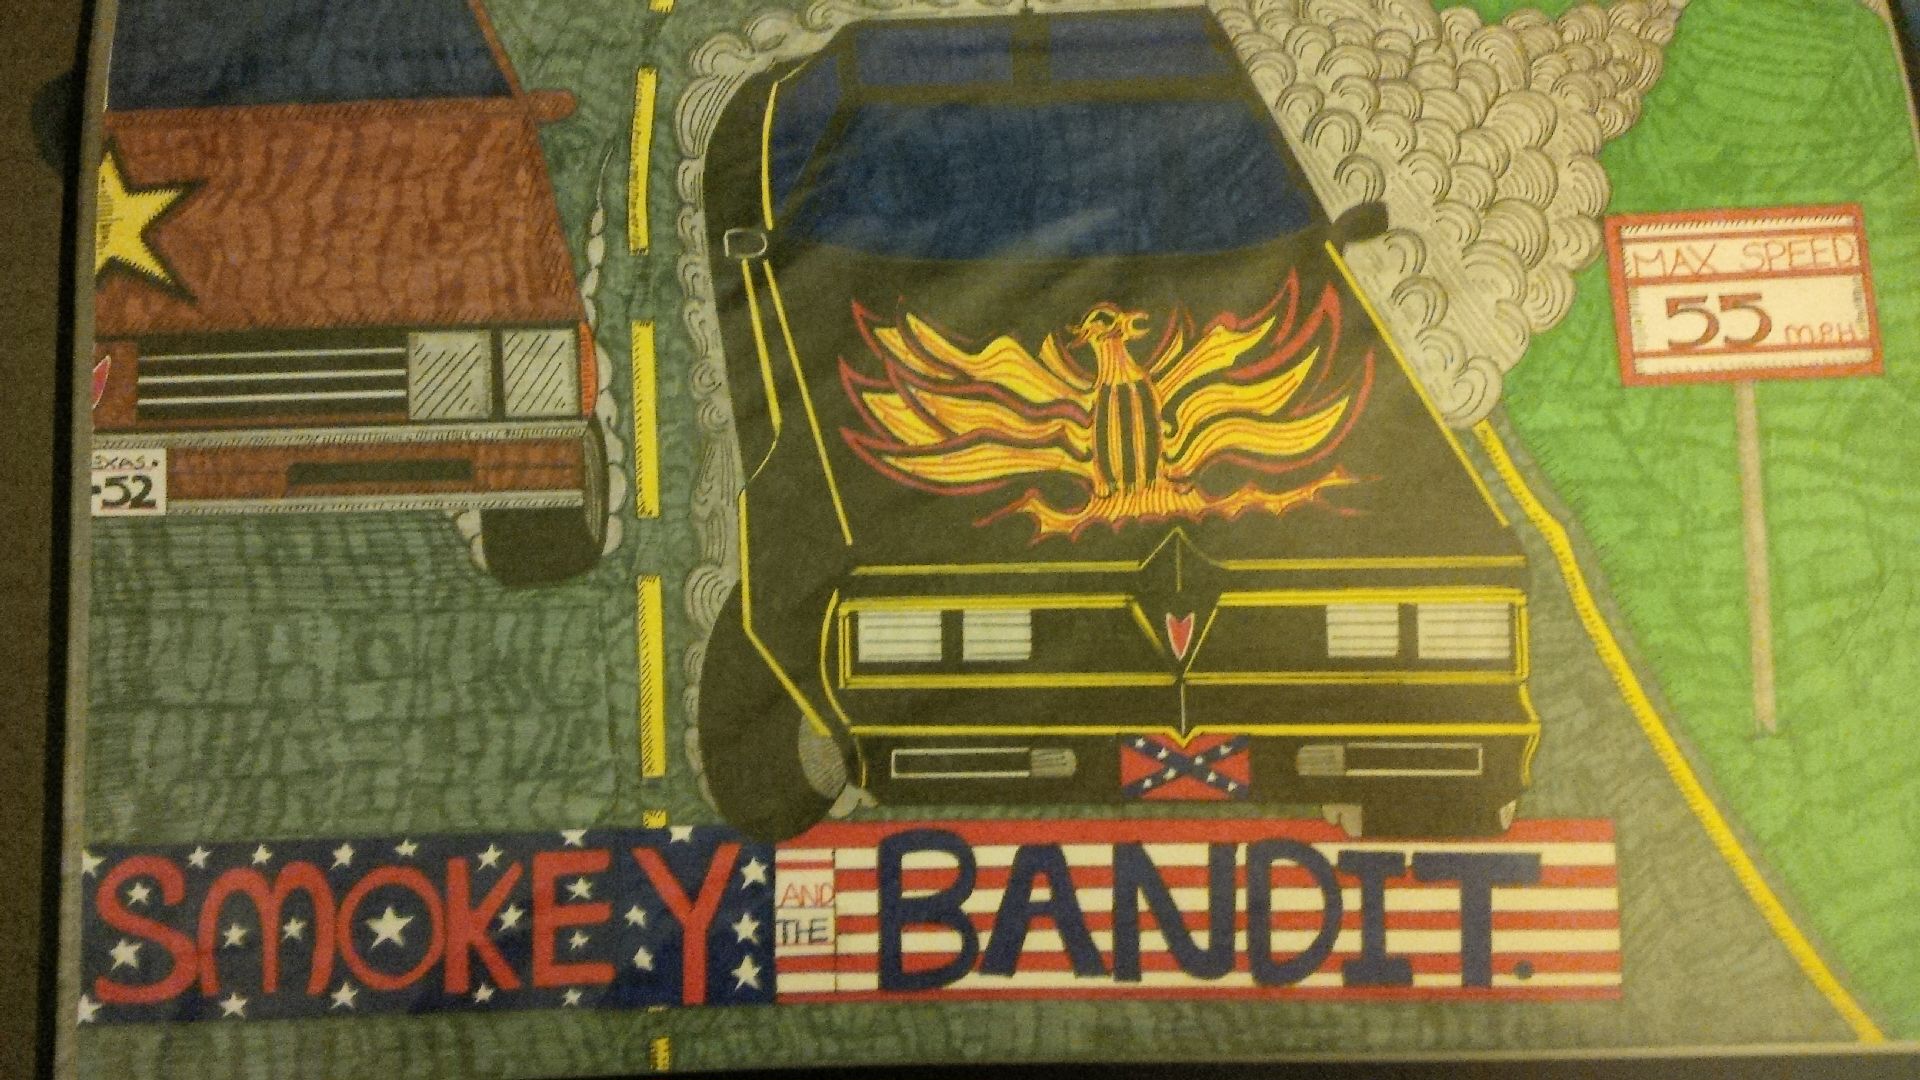 Smokey and the Bandit by Anthony1979